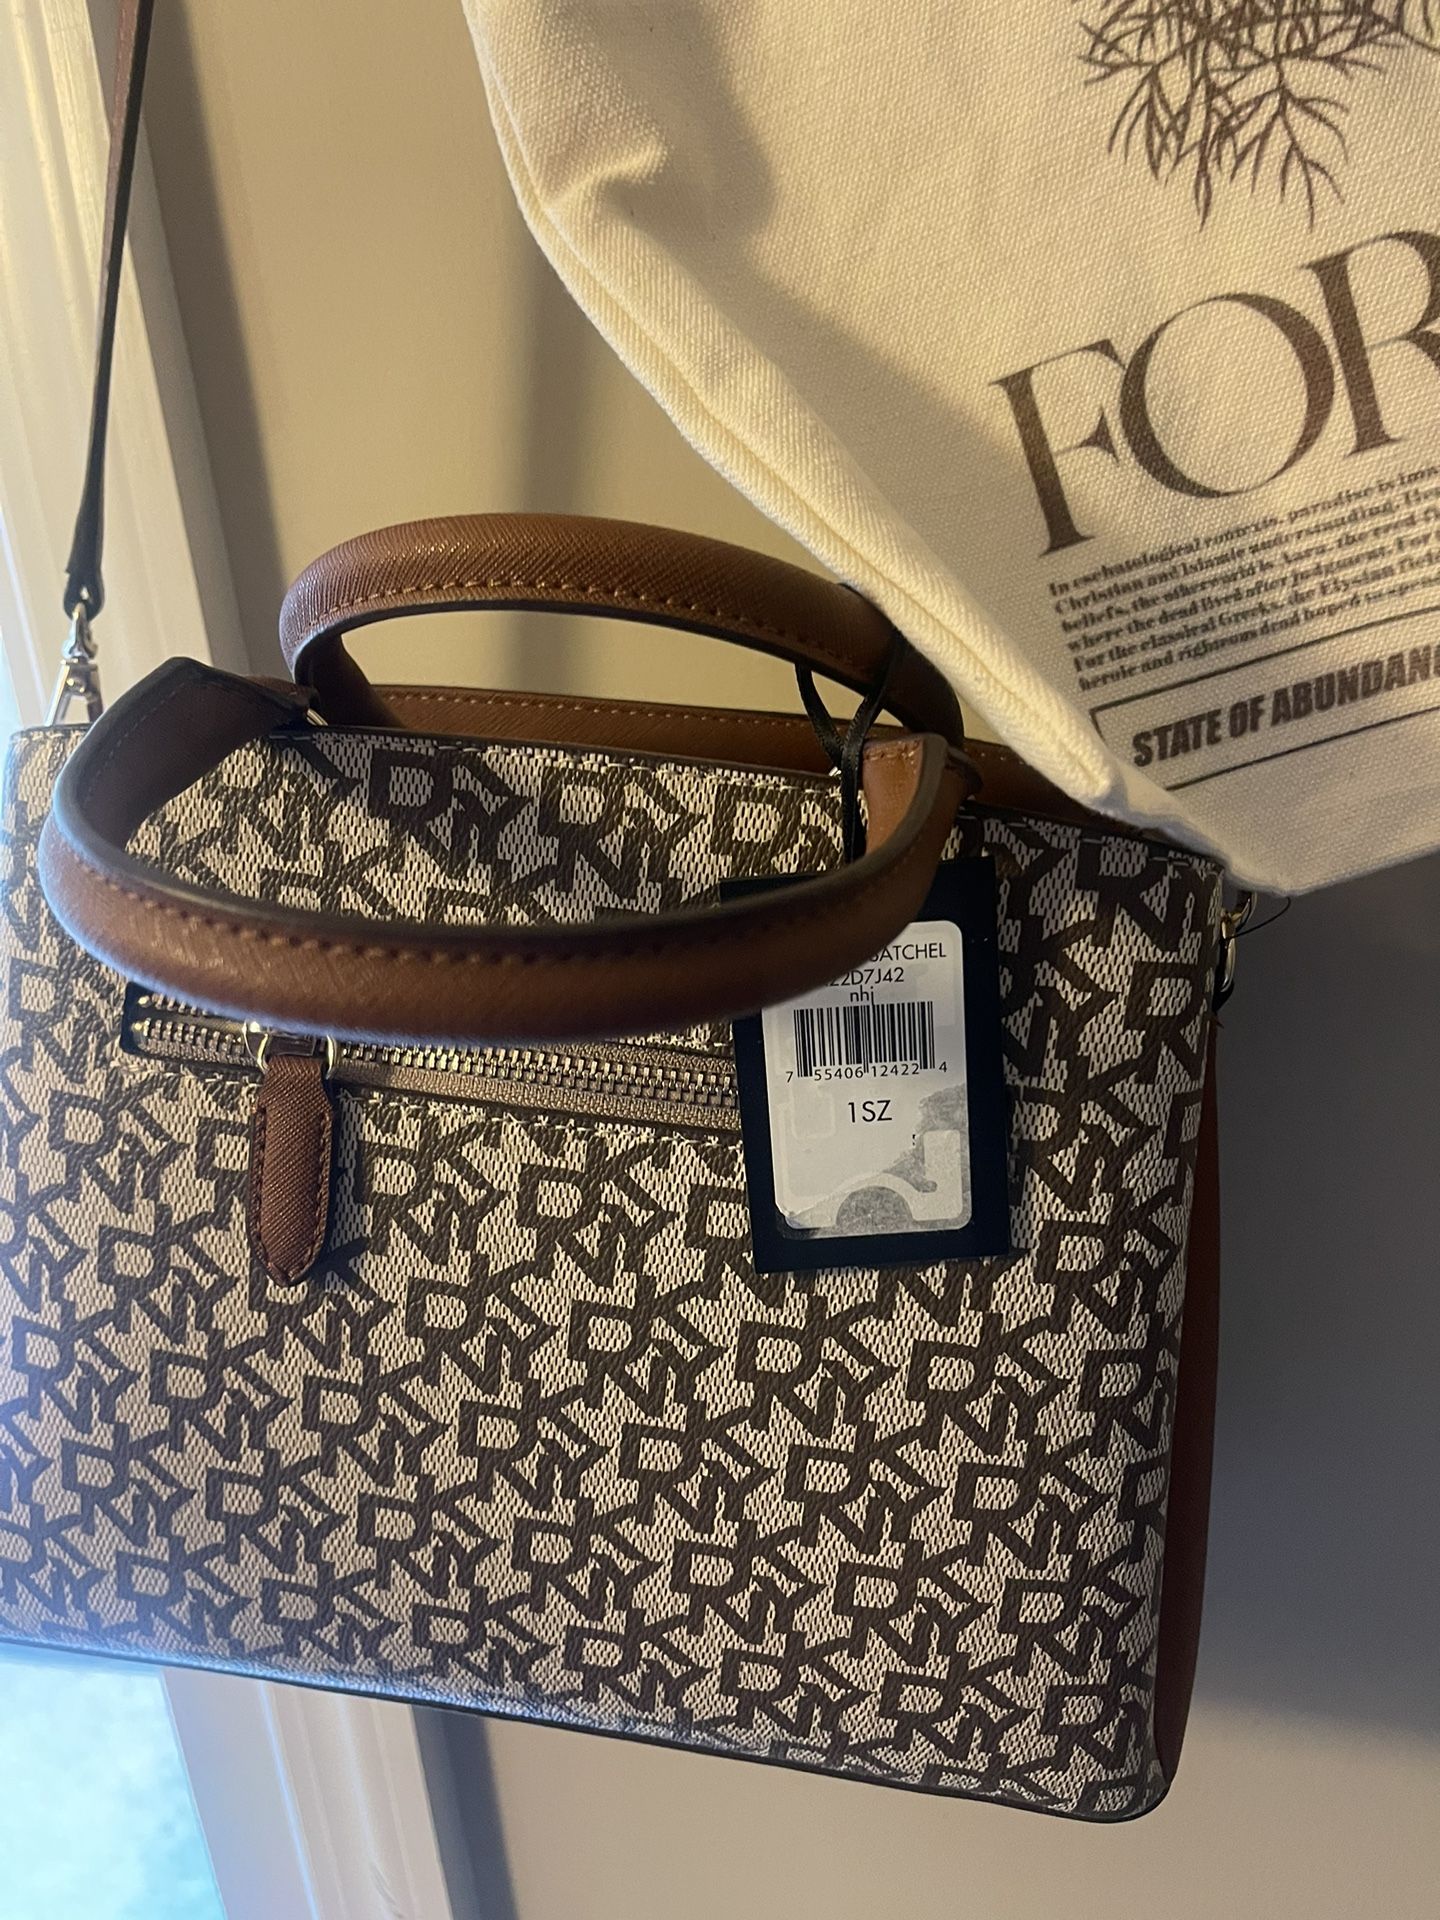 $100 BRAND NEW DKNY PAIGE MD SATCHEL for Sale in North Plainfield